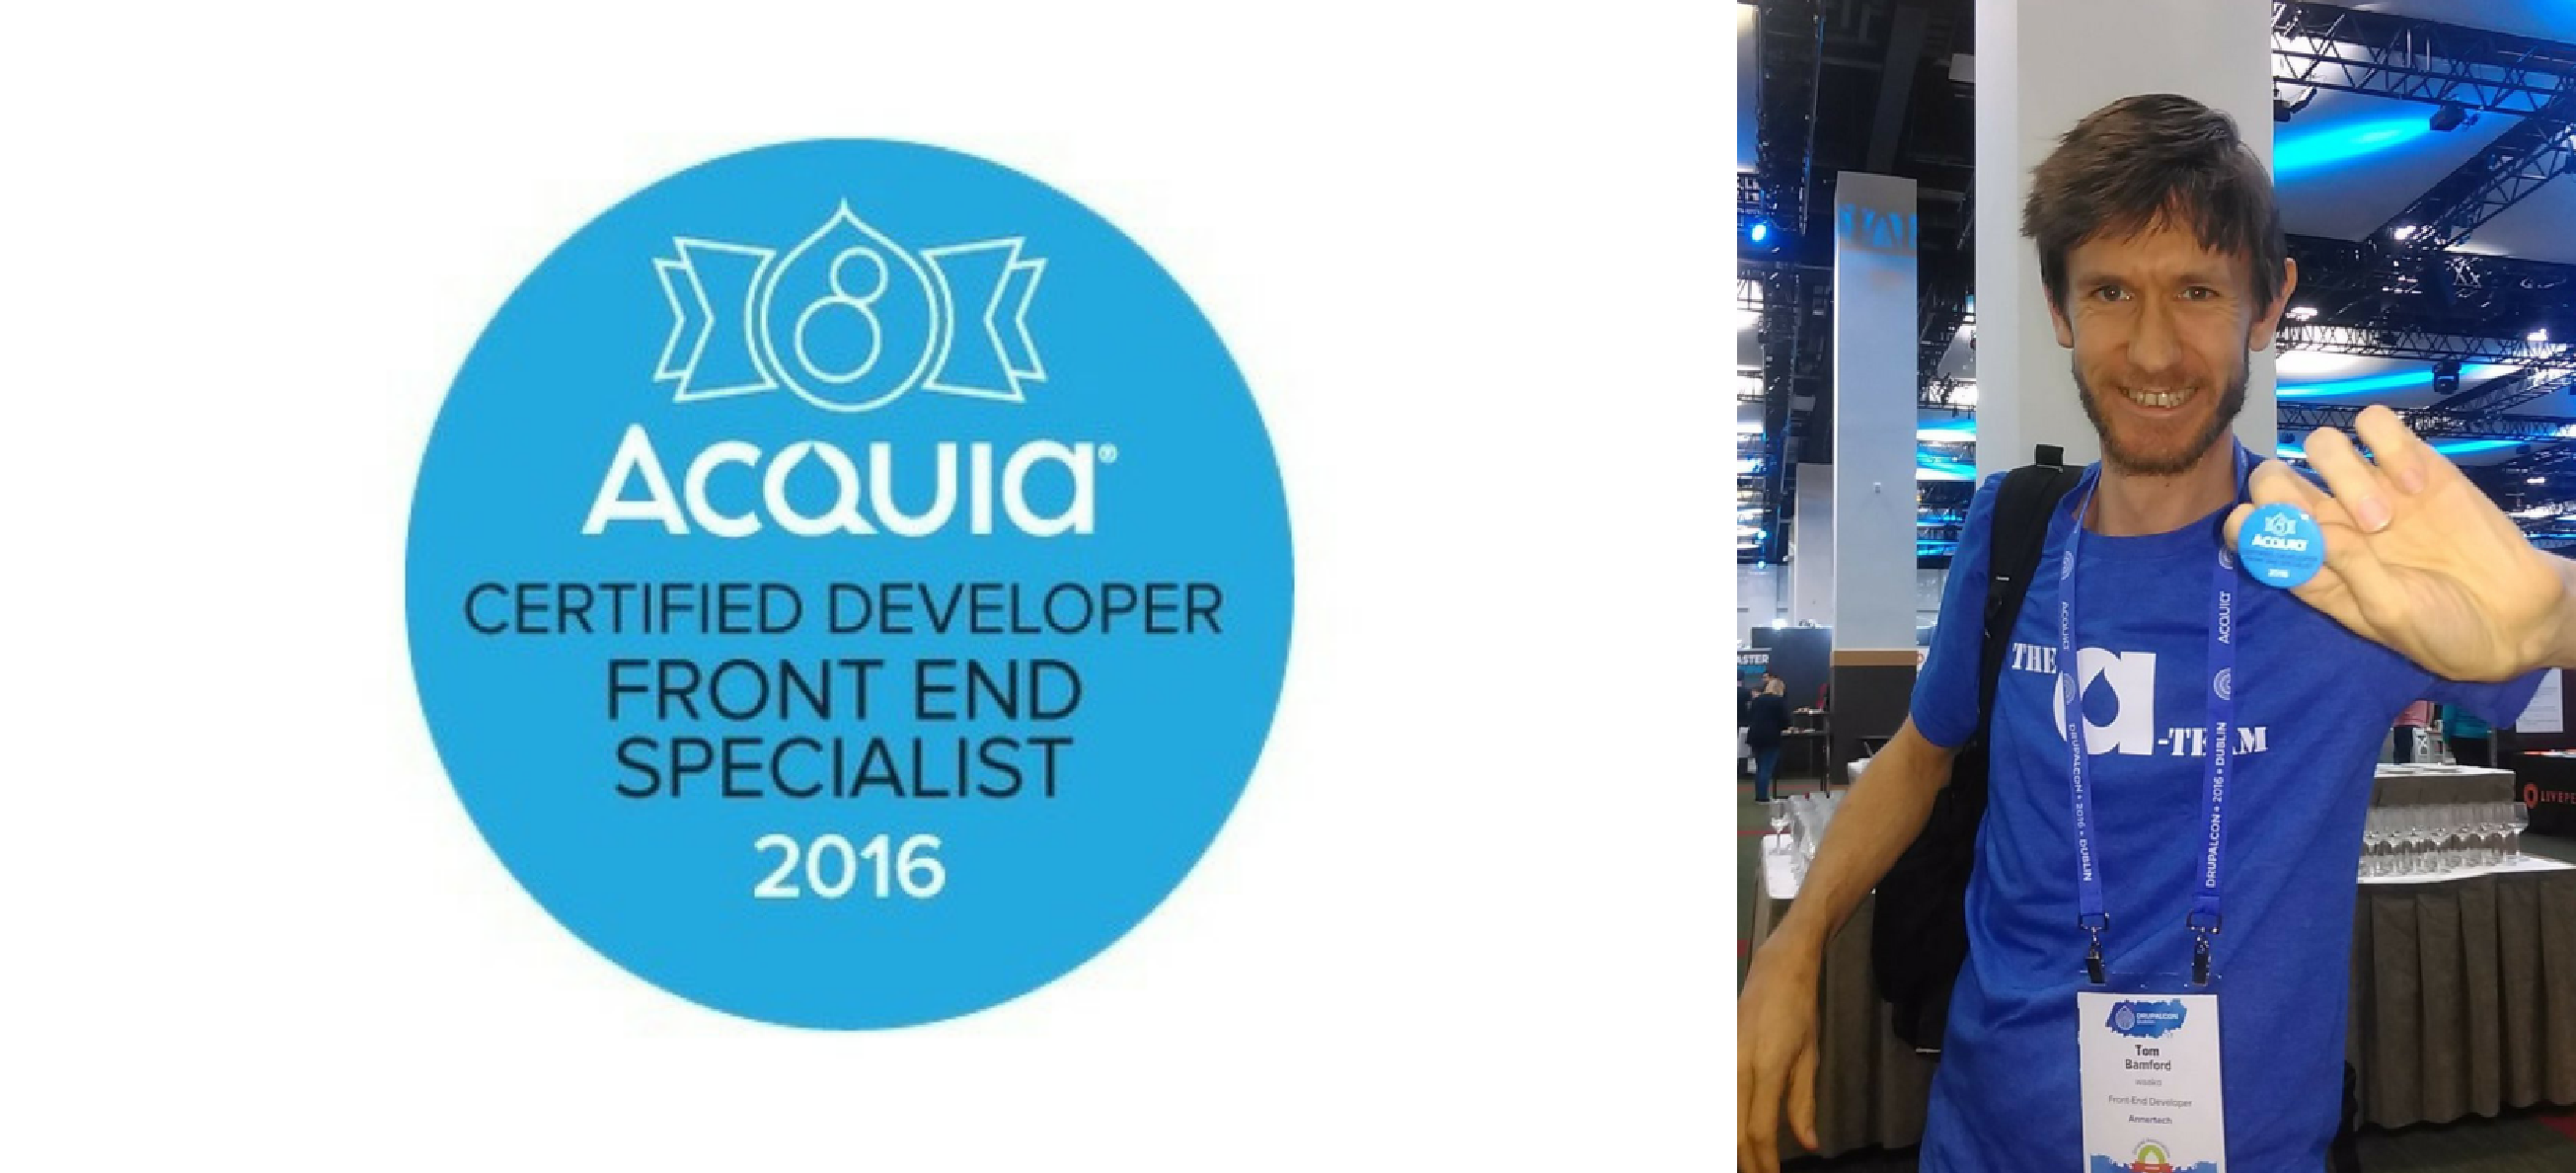 Tom with his Acquia Certified Developer badge